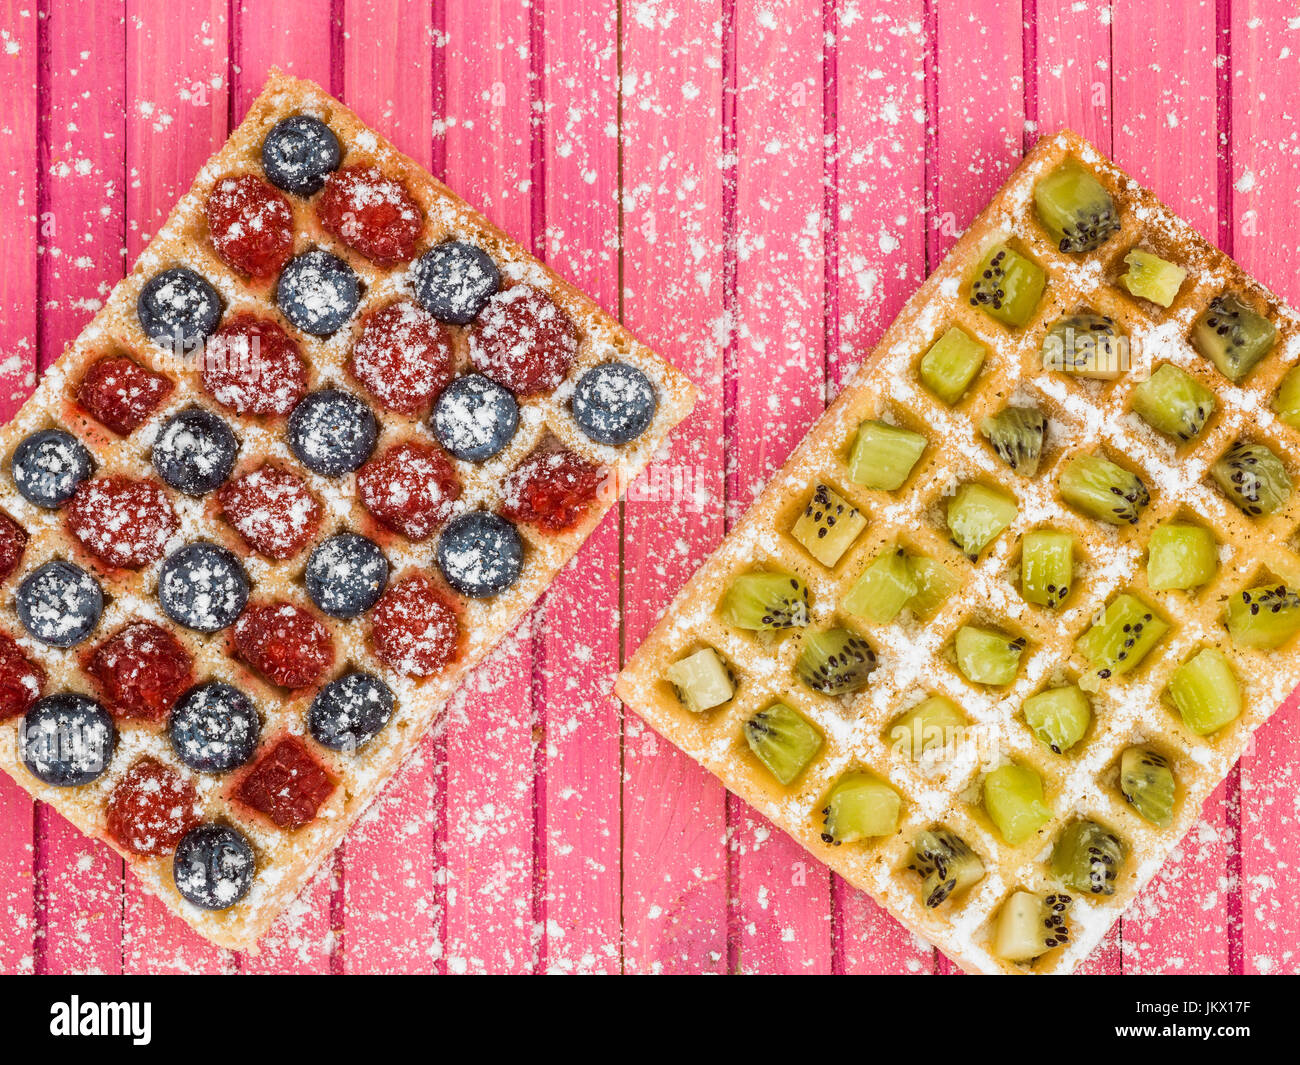 Fruit Waffles with Raspberries Blueberries and Kiwi Fruit and Icing Sugar Against a Pink Wooden Background Stock Photo